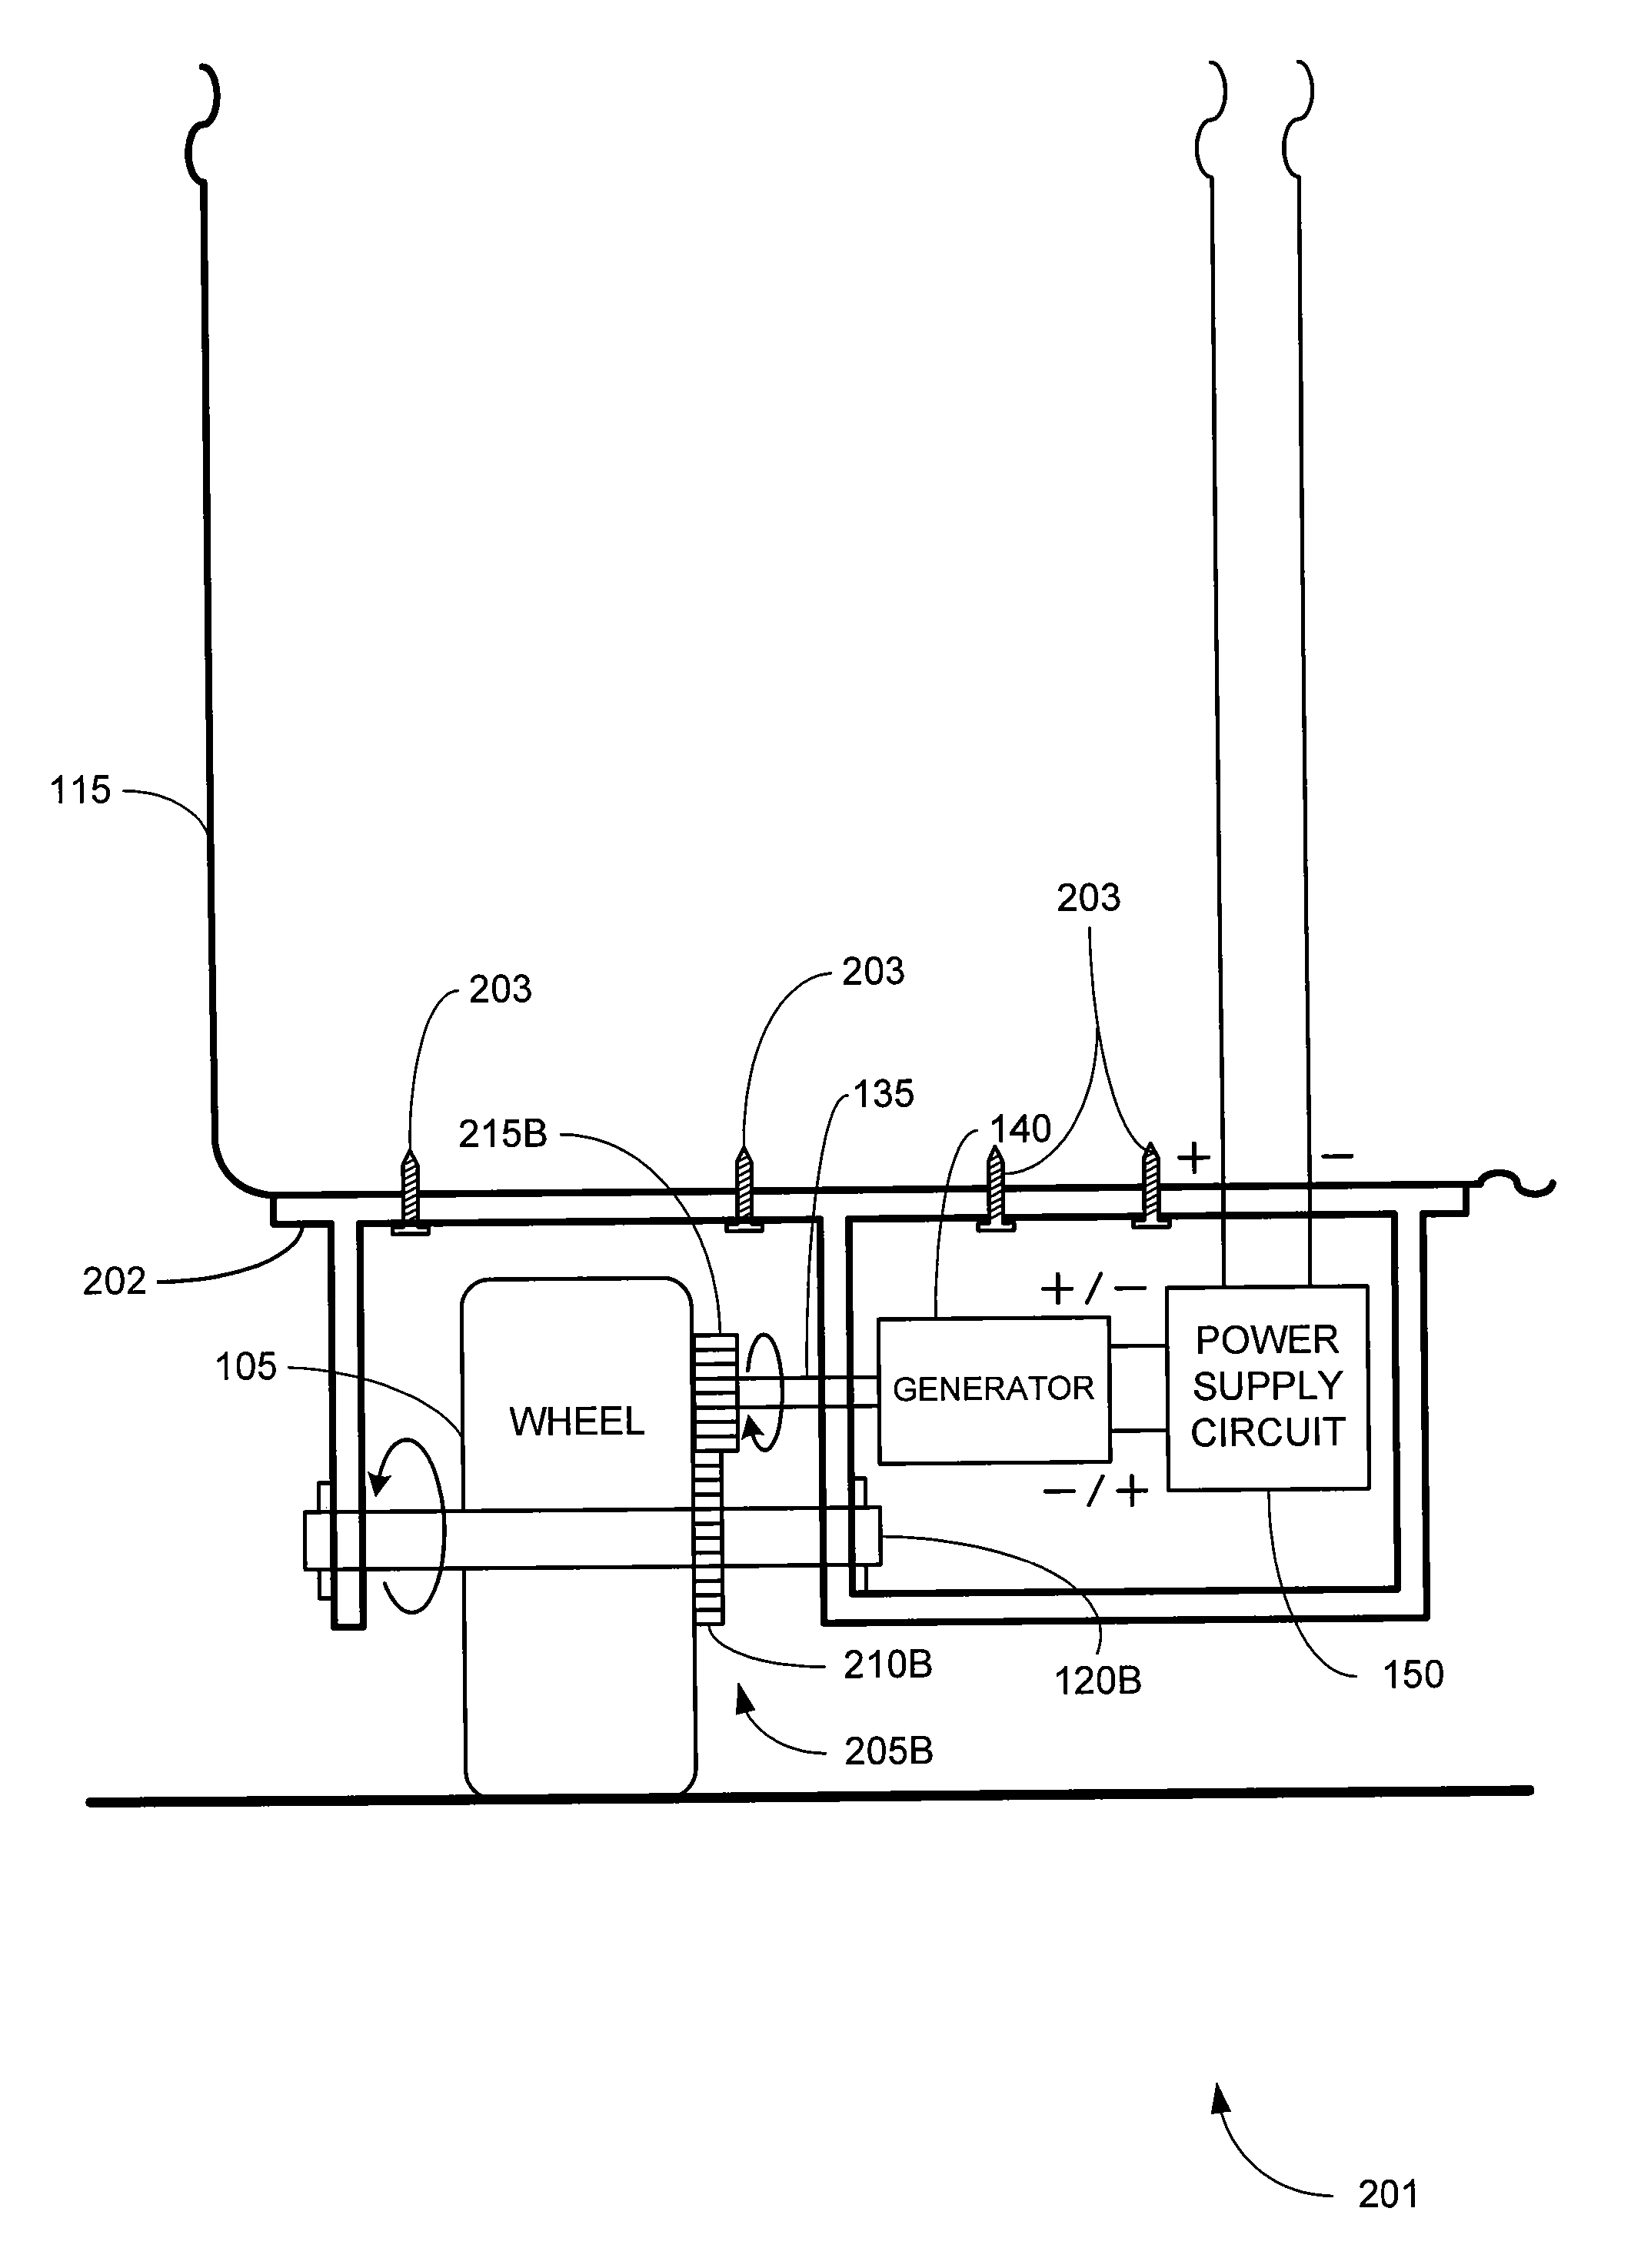 Luggage with Power Supply Circuit